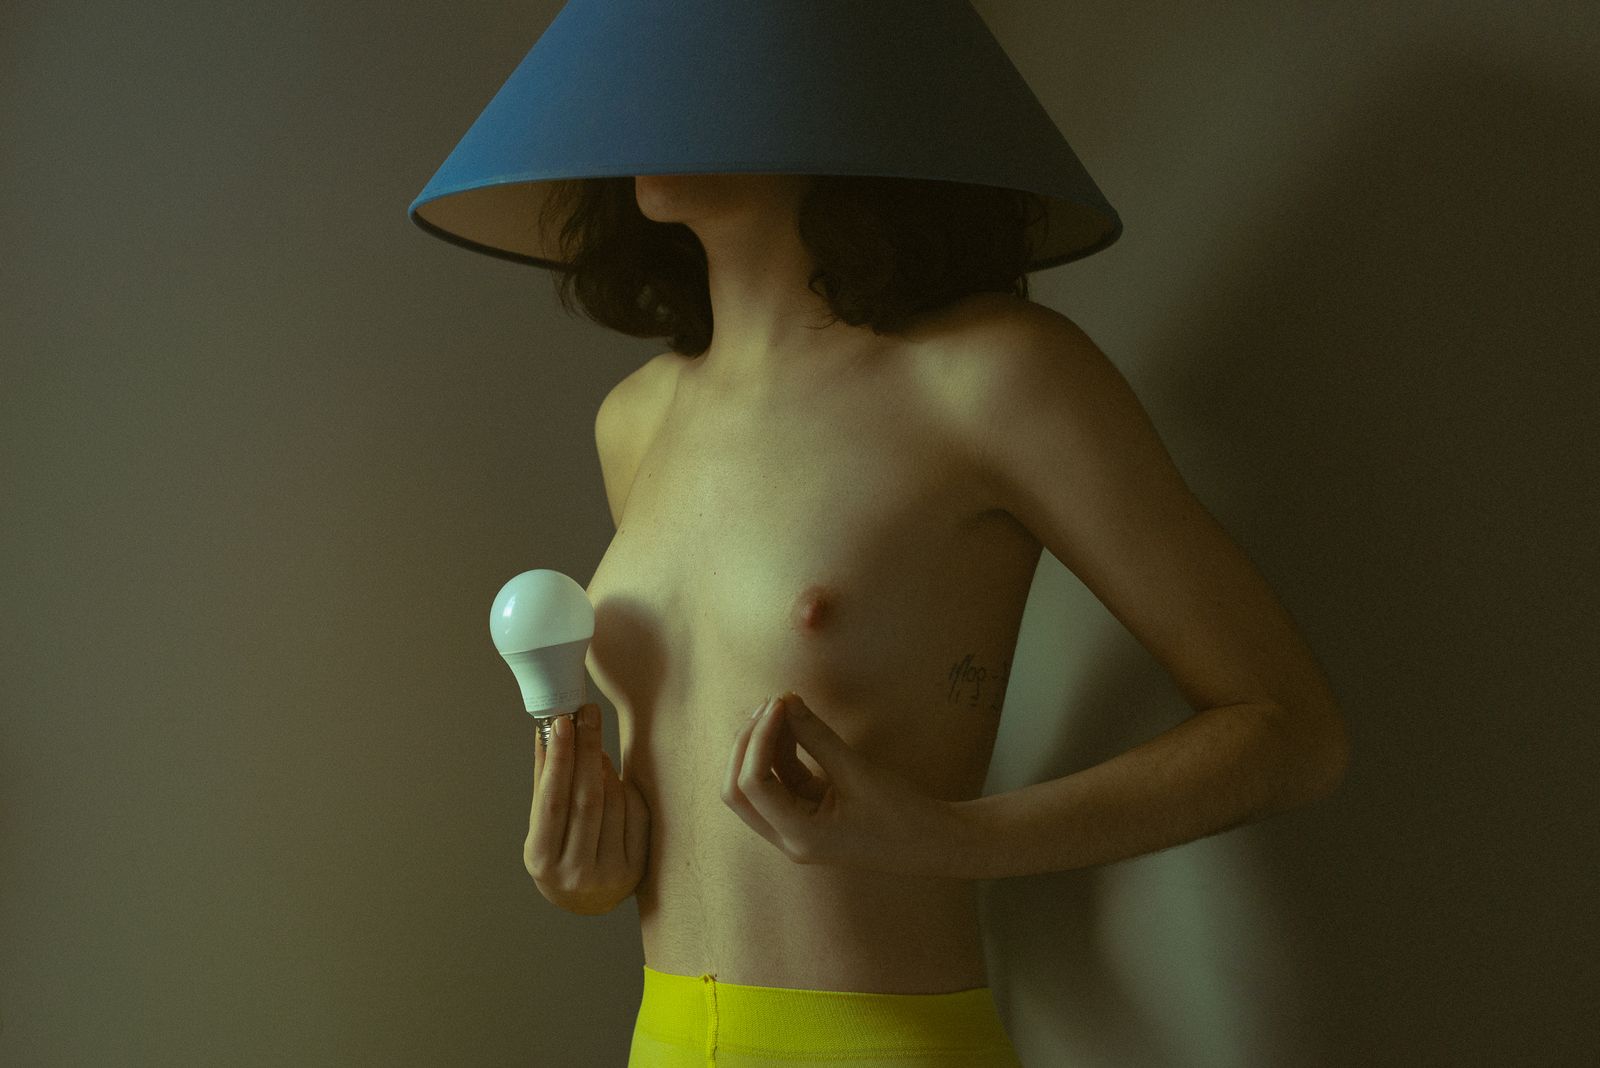 © Mónica Egido - Image from the Home photography project